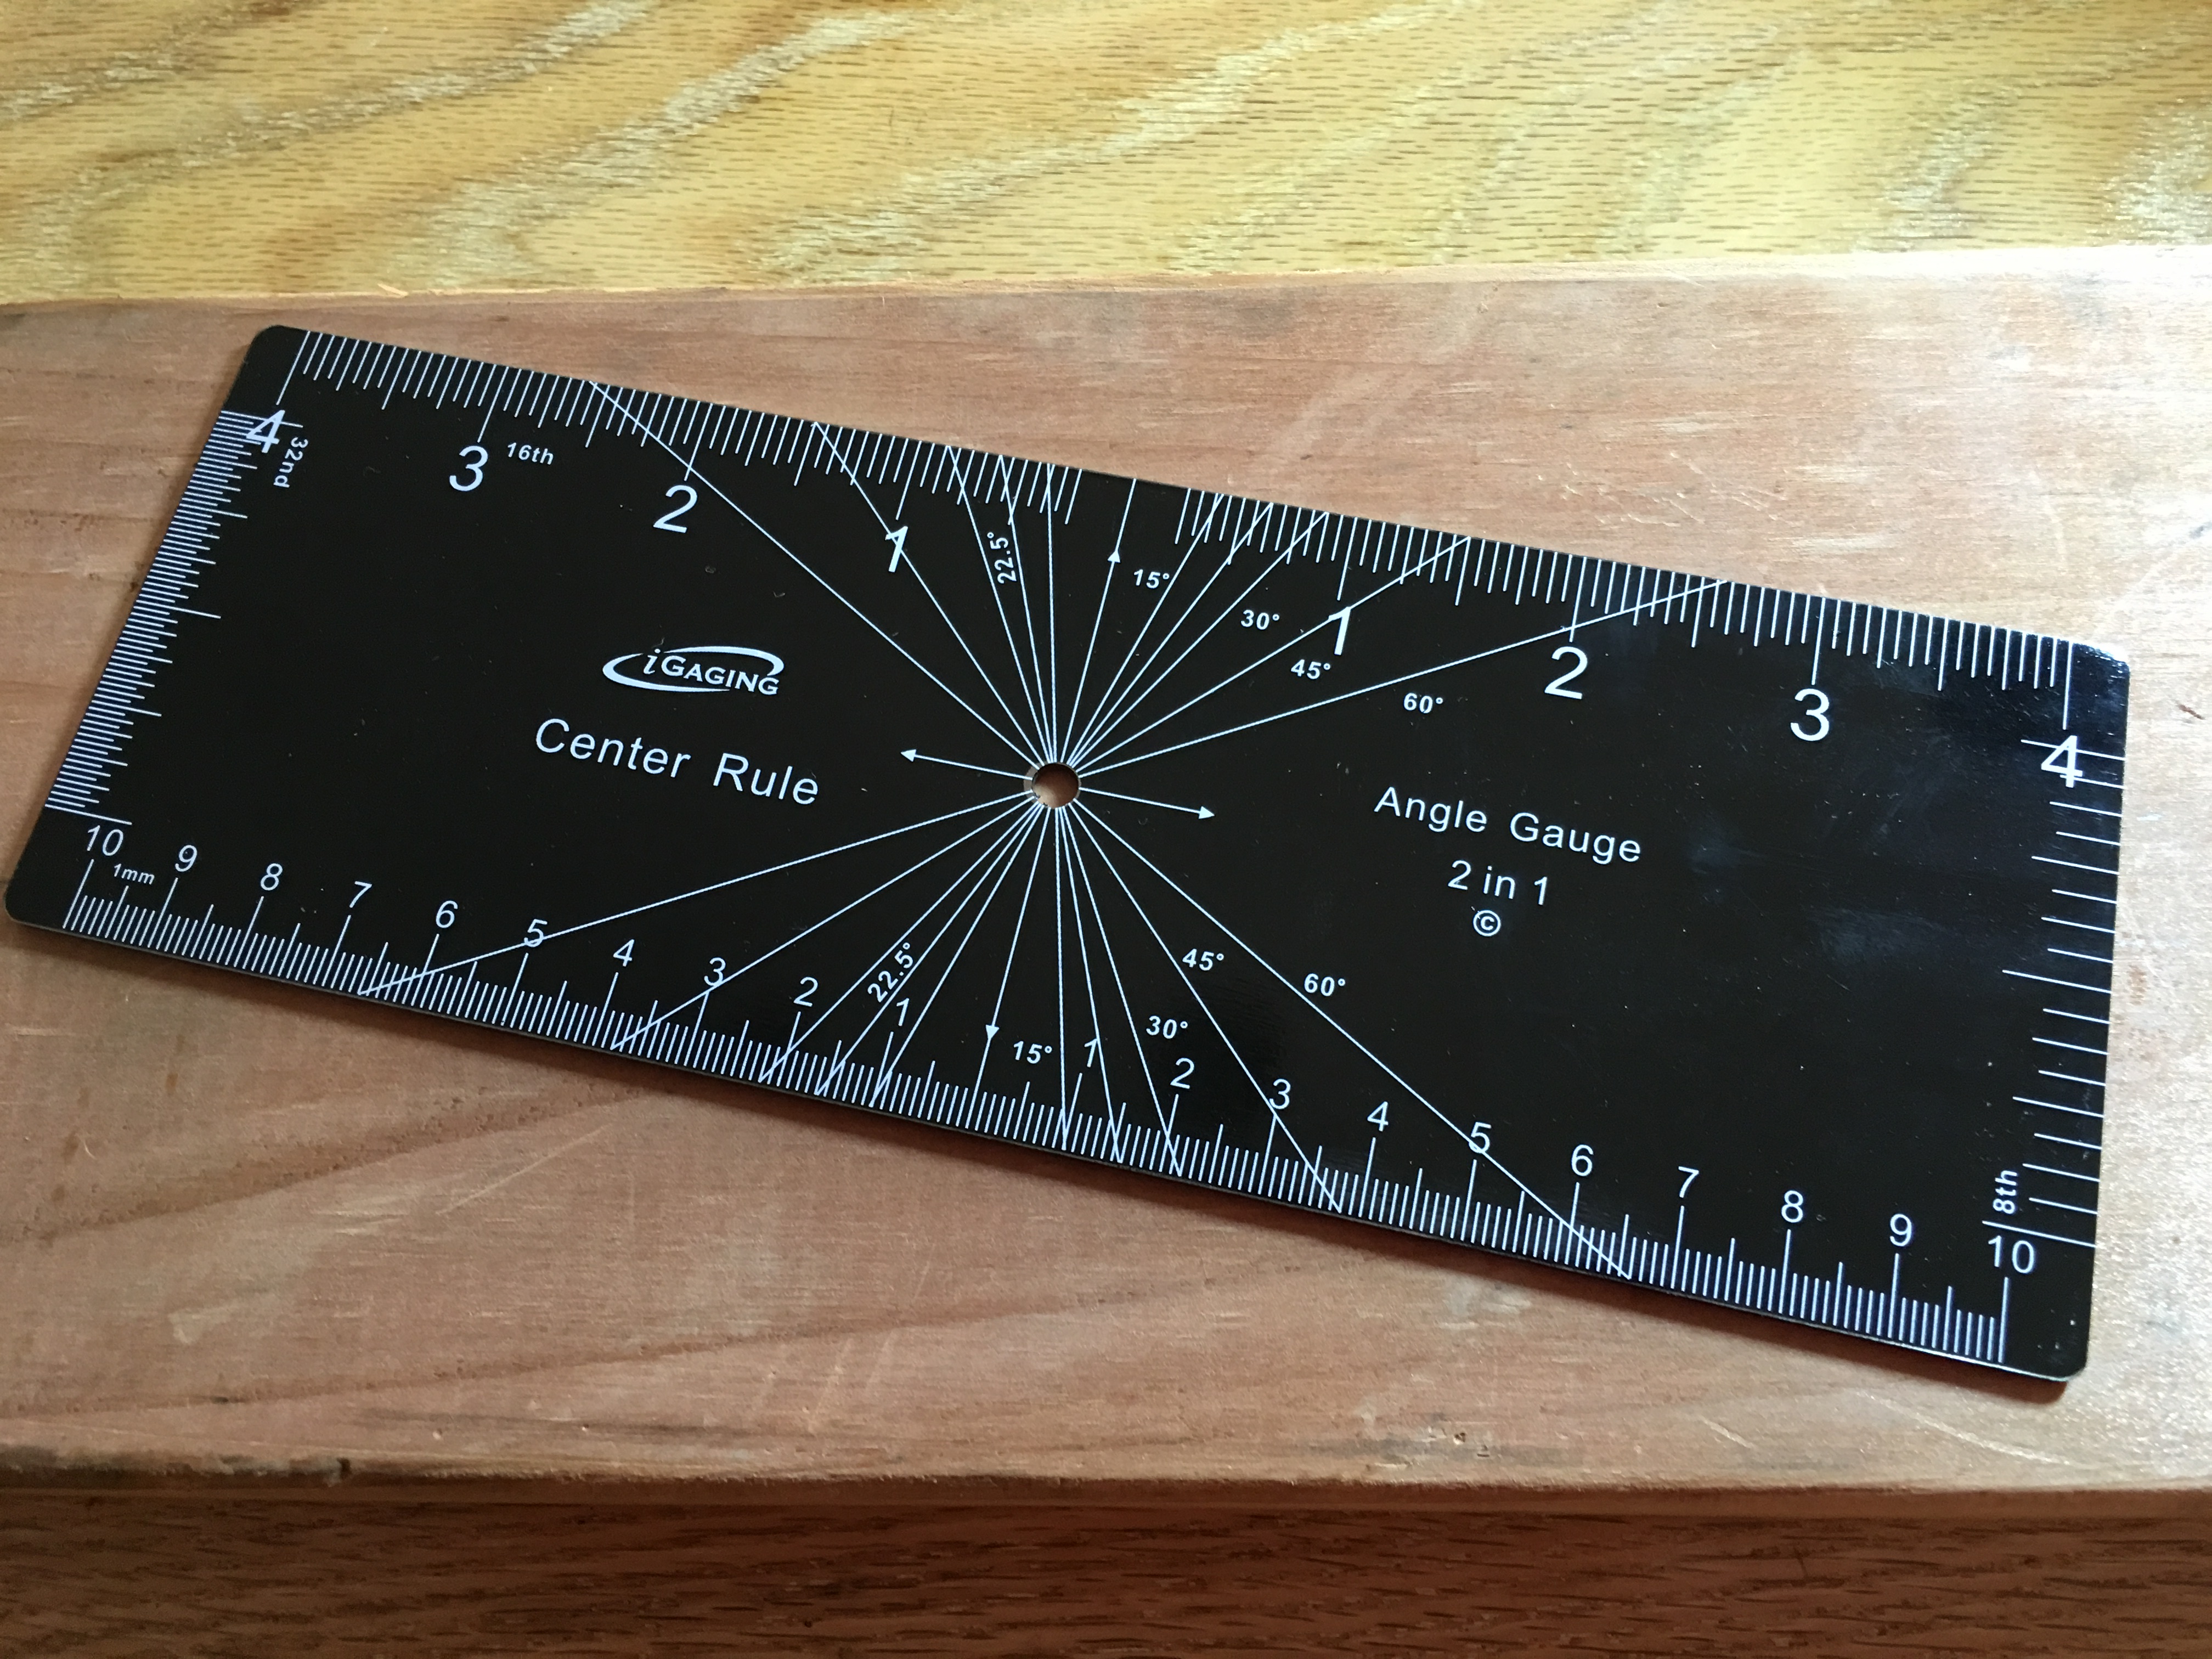 Igaging Center Rule and Angle Gauge